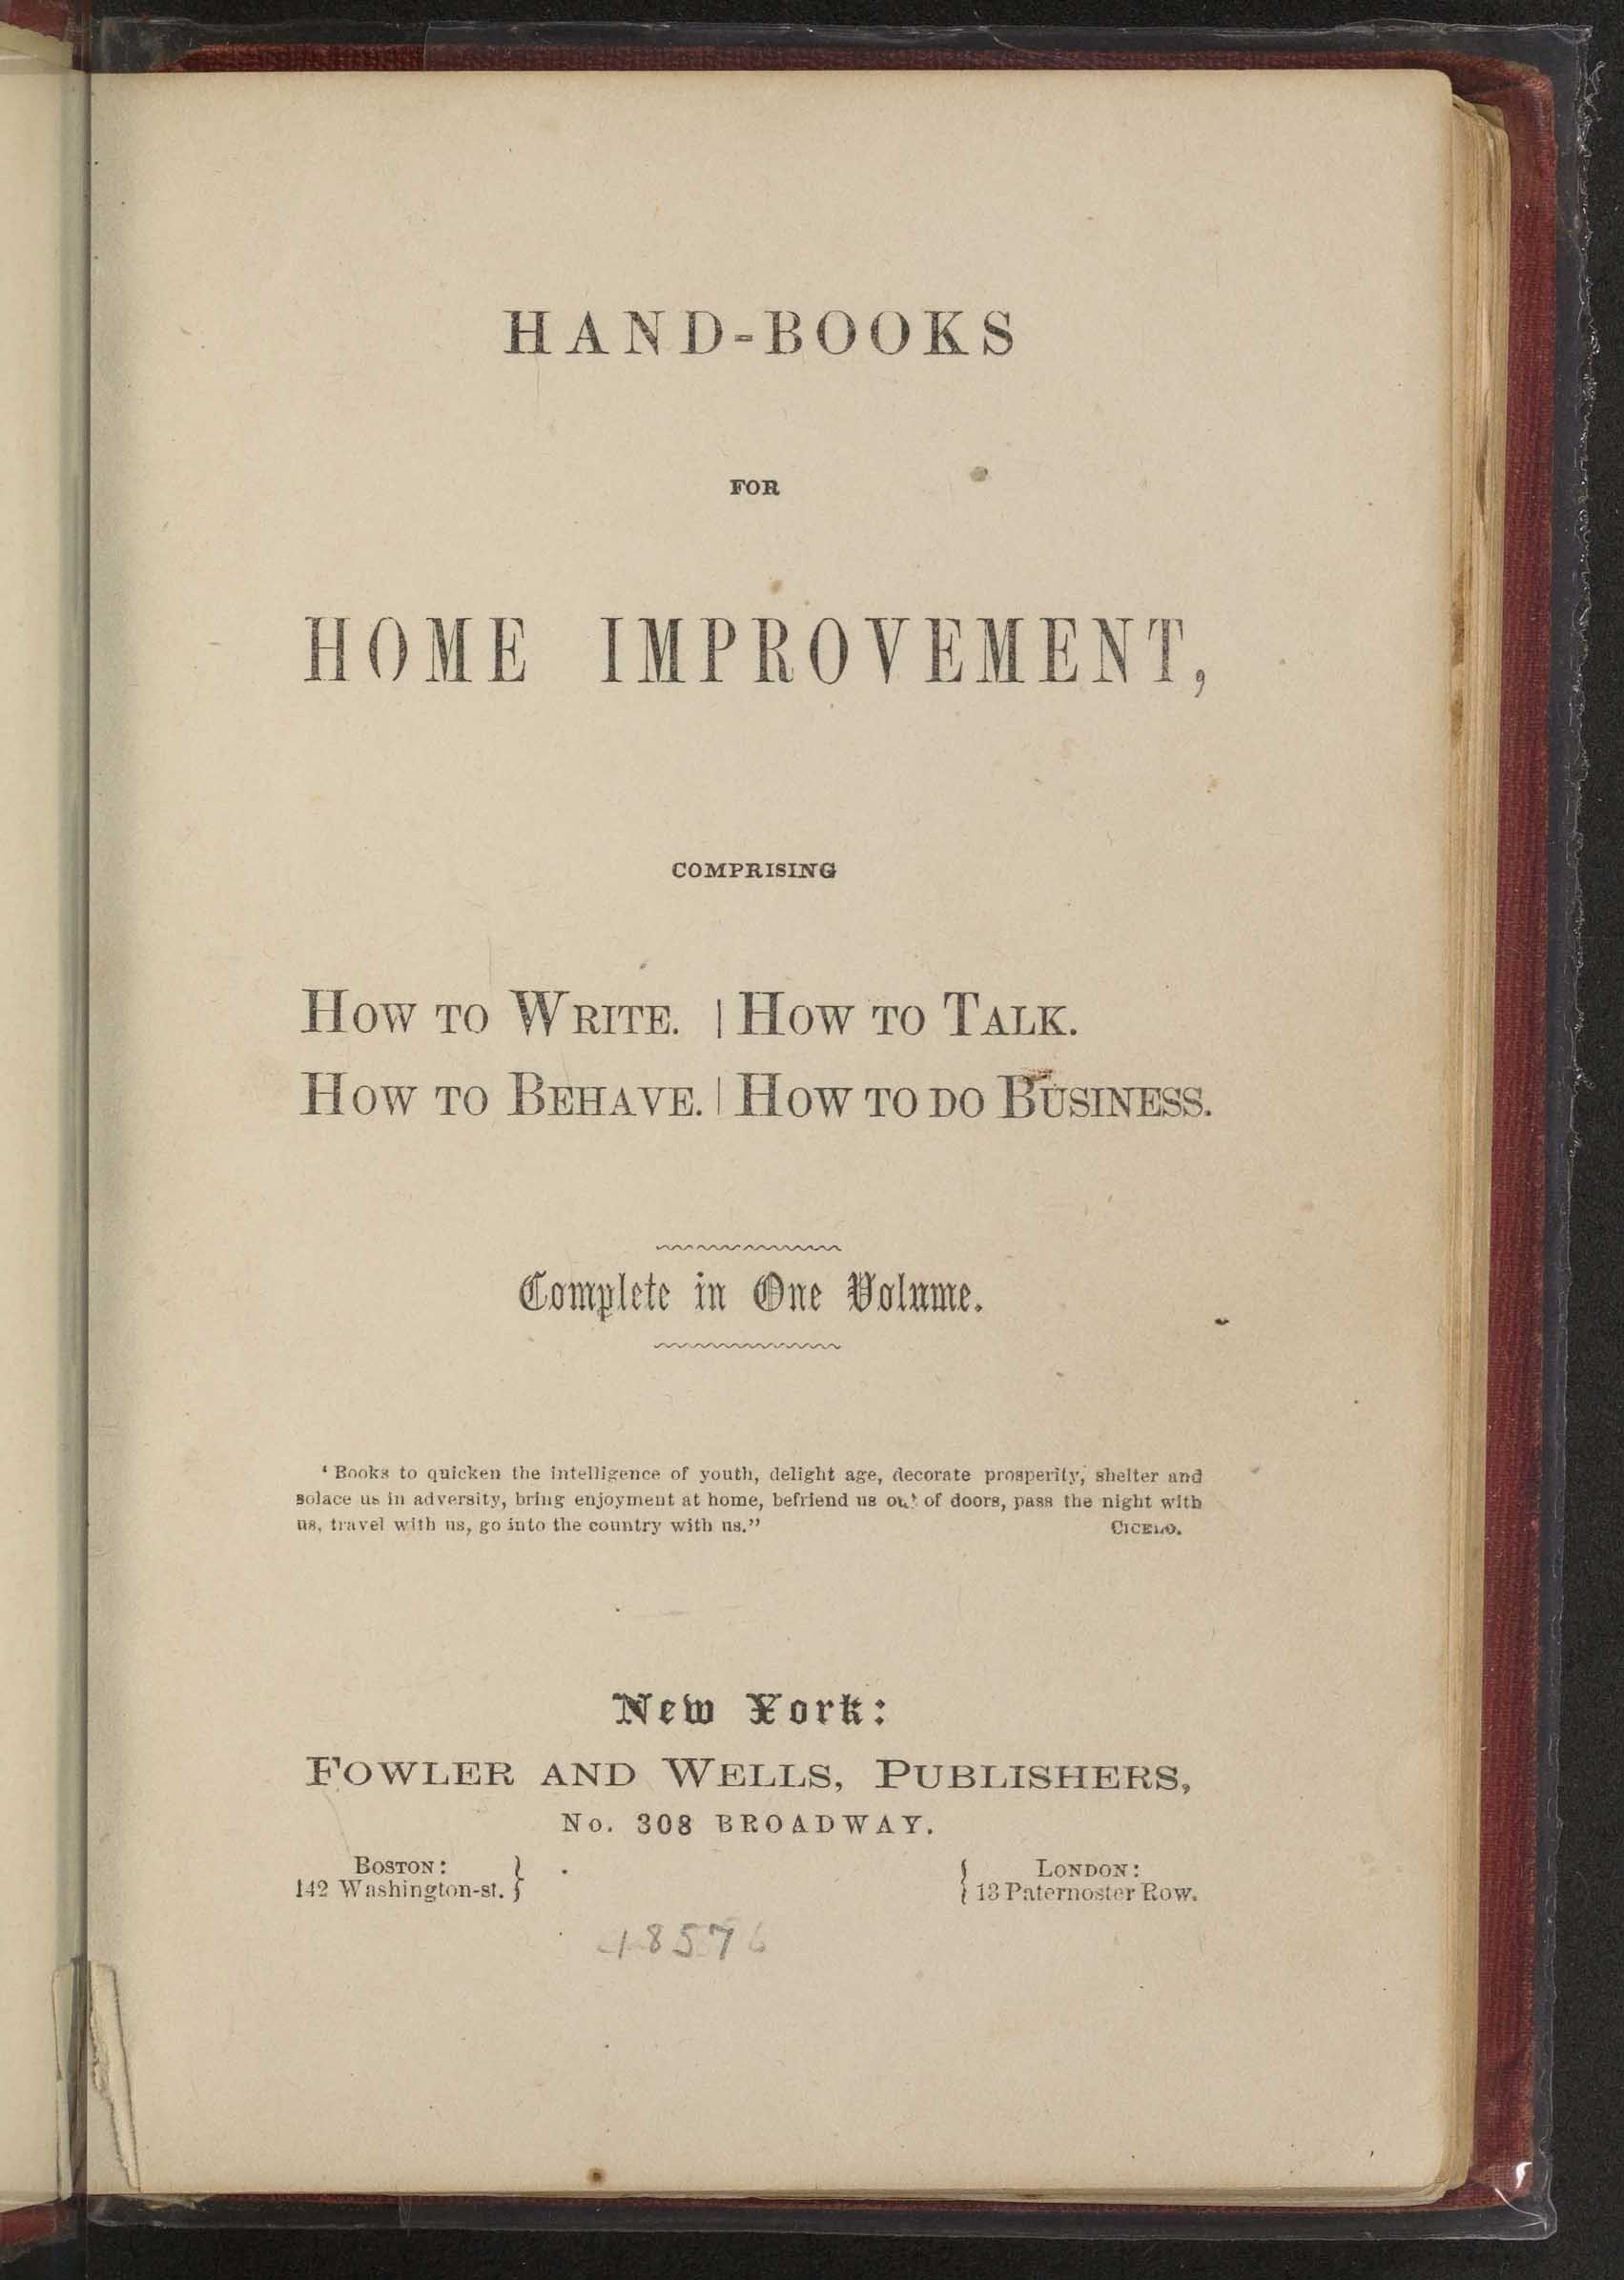 Hand-books for Home Improvement